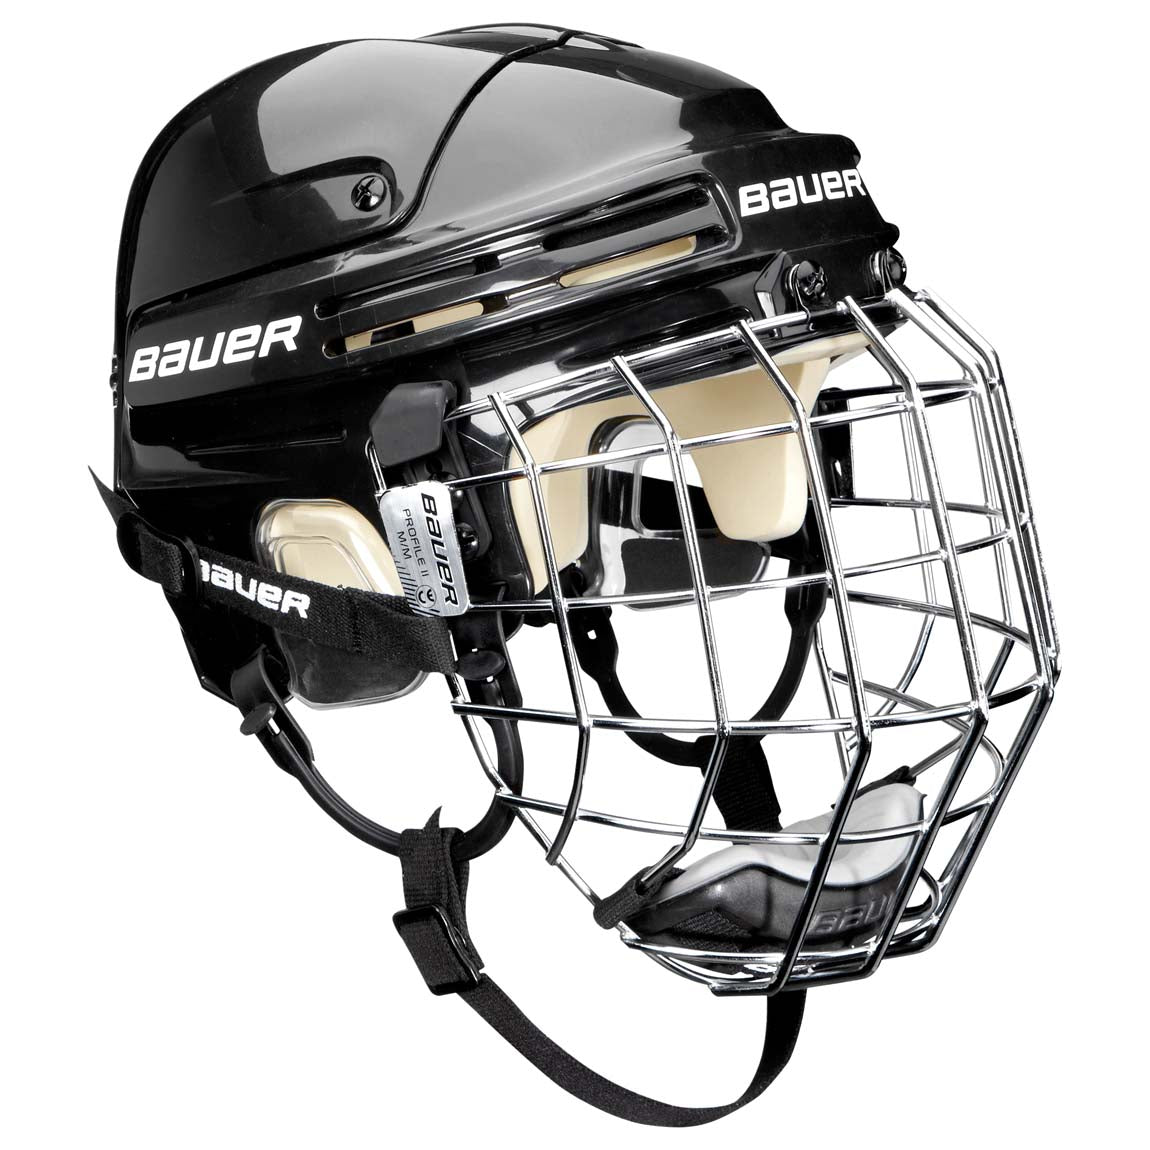 Bauer 4500 Combo Hockey Helmet-Bauer-Sports Replay - Sports Excellence